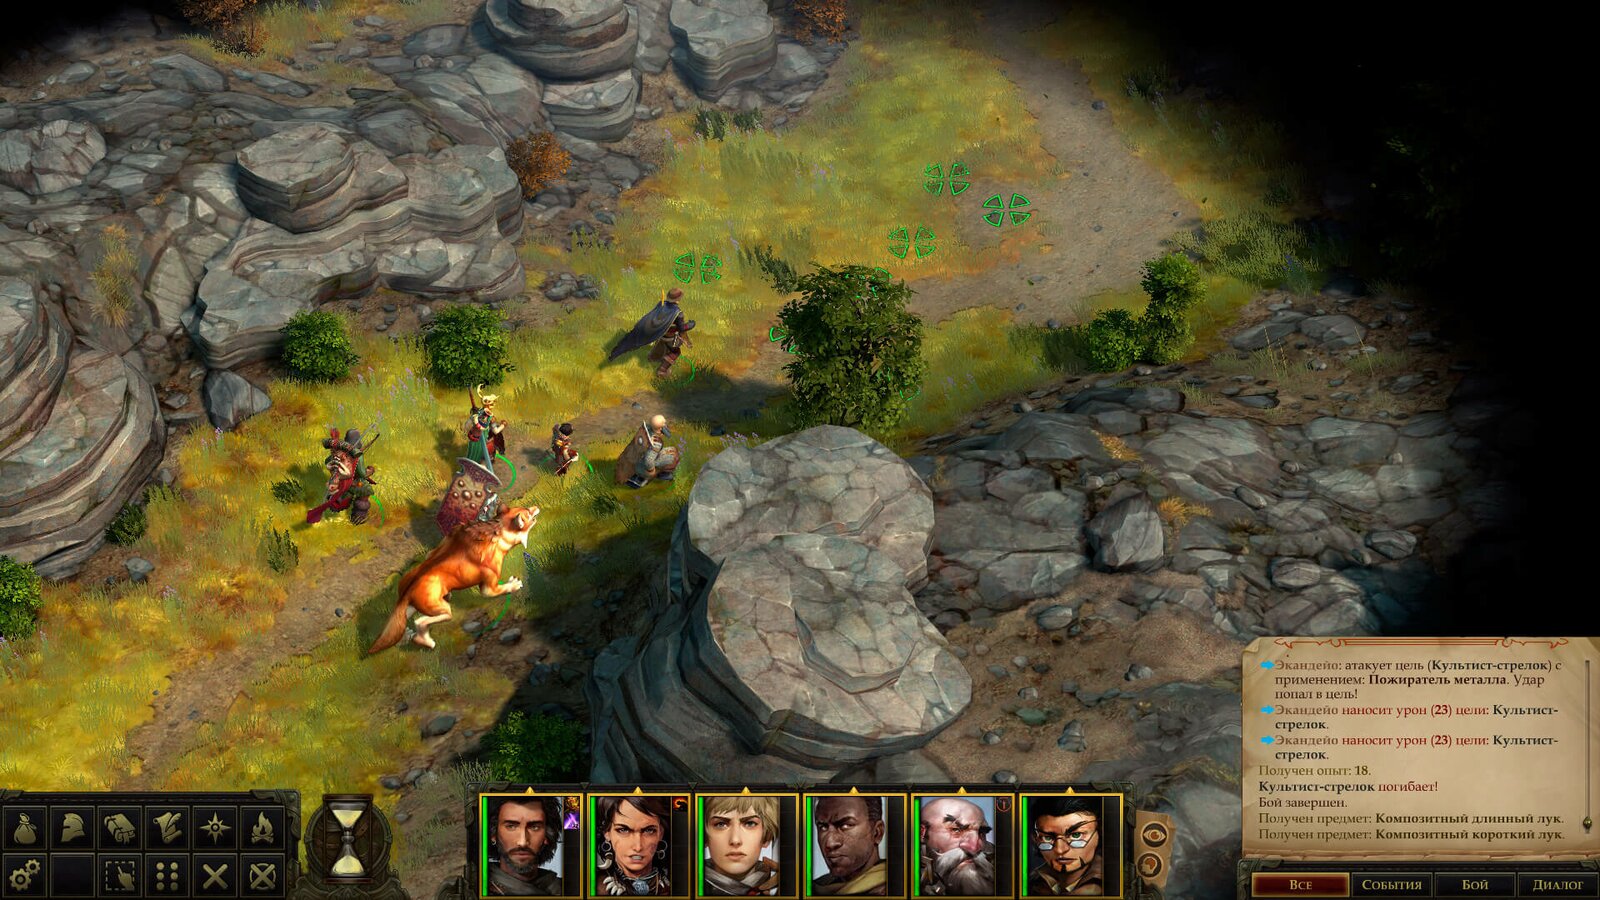 Pathfinder: Kingmaker - Special Edition